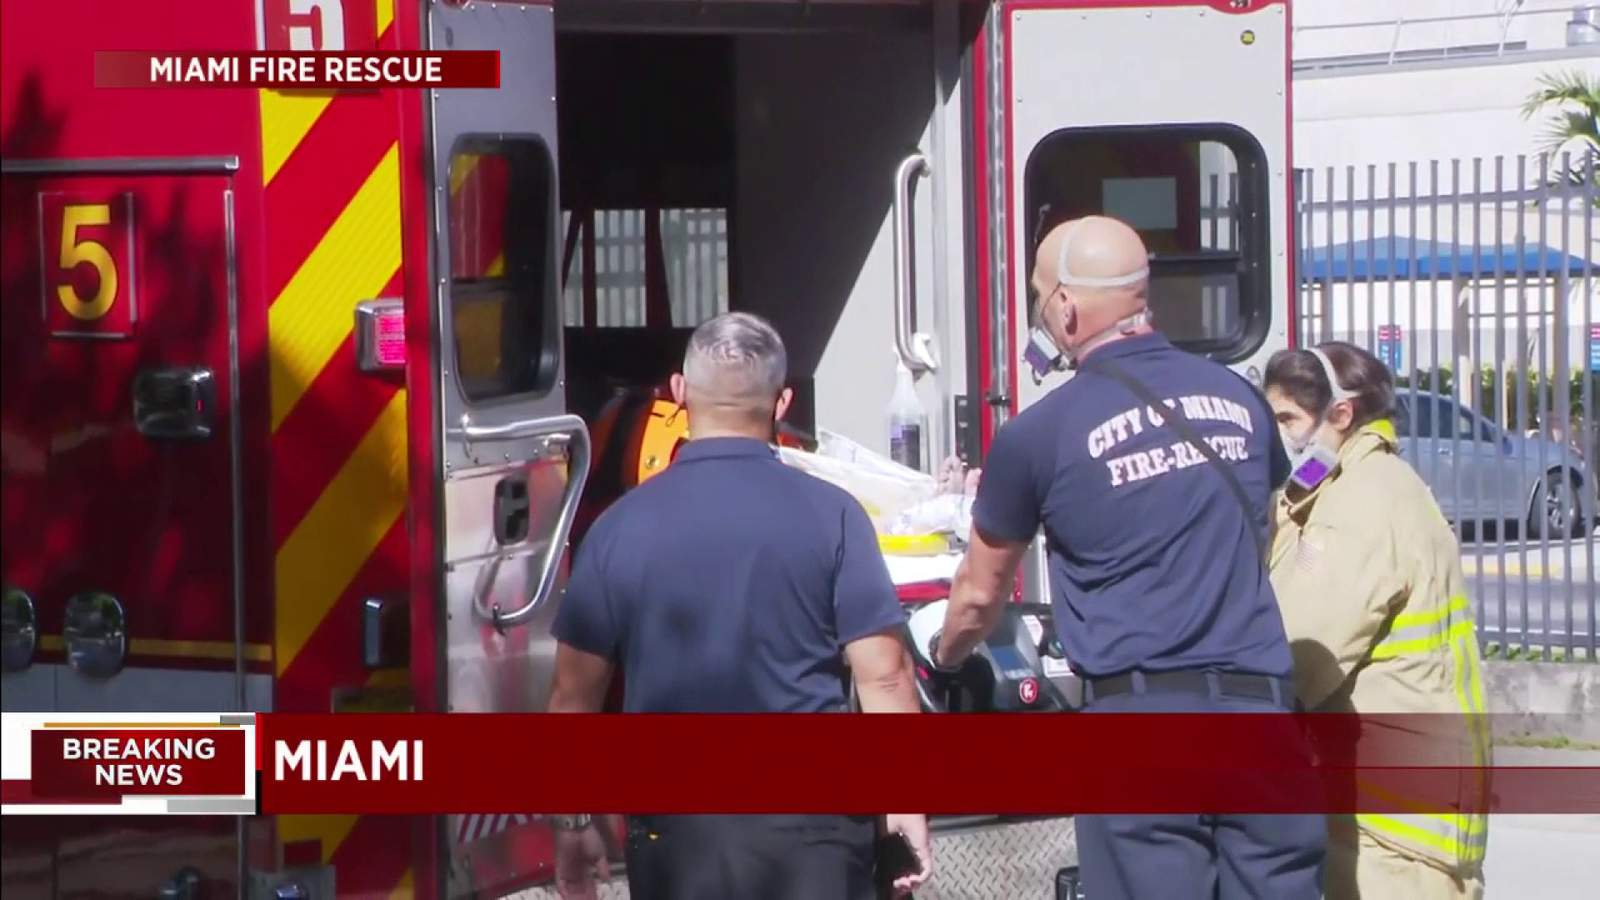 Miami Fire Rescue personnel rescues woman at Metrorail station